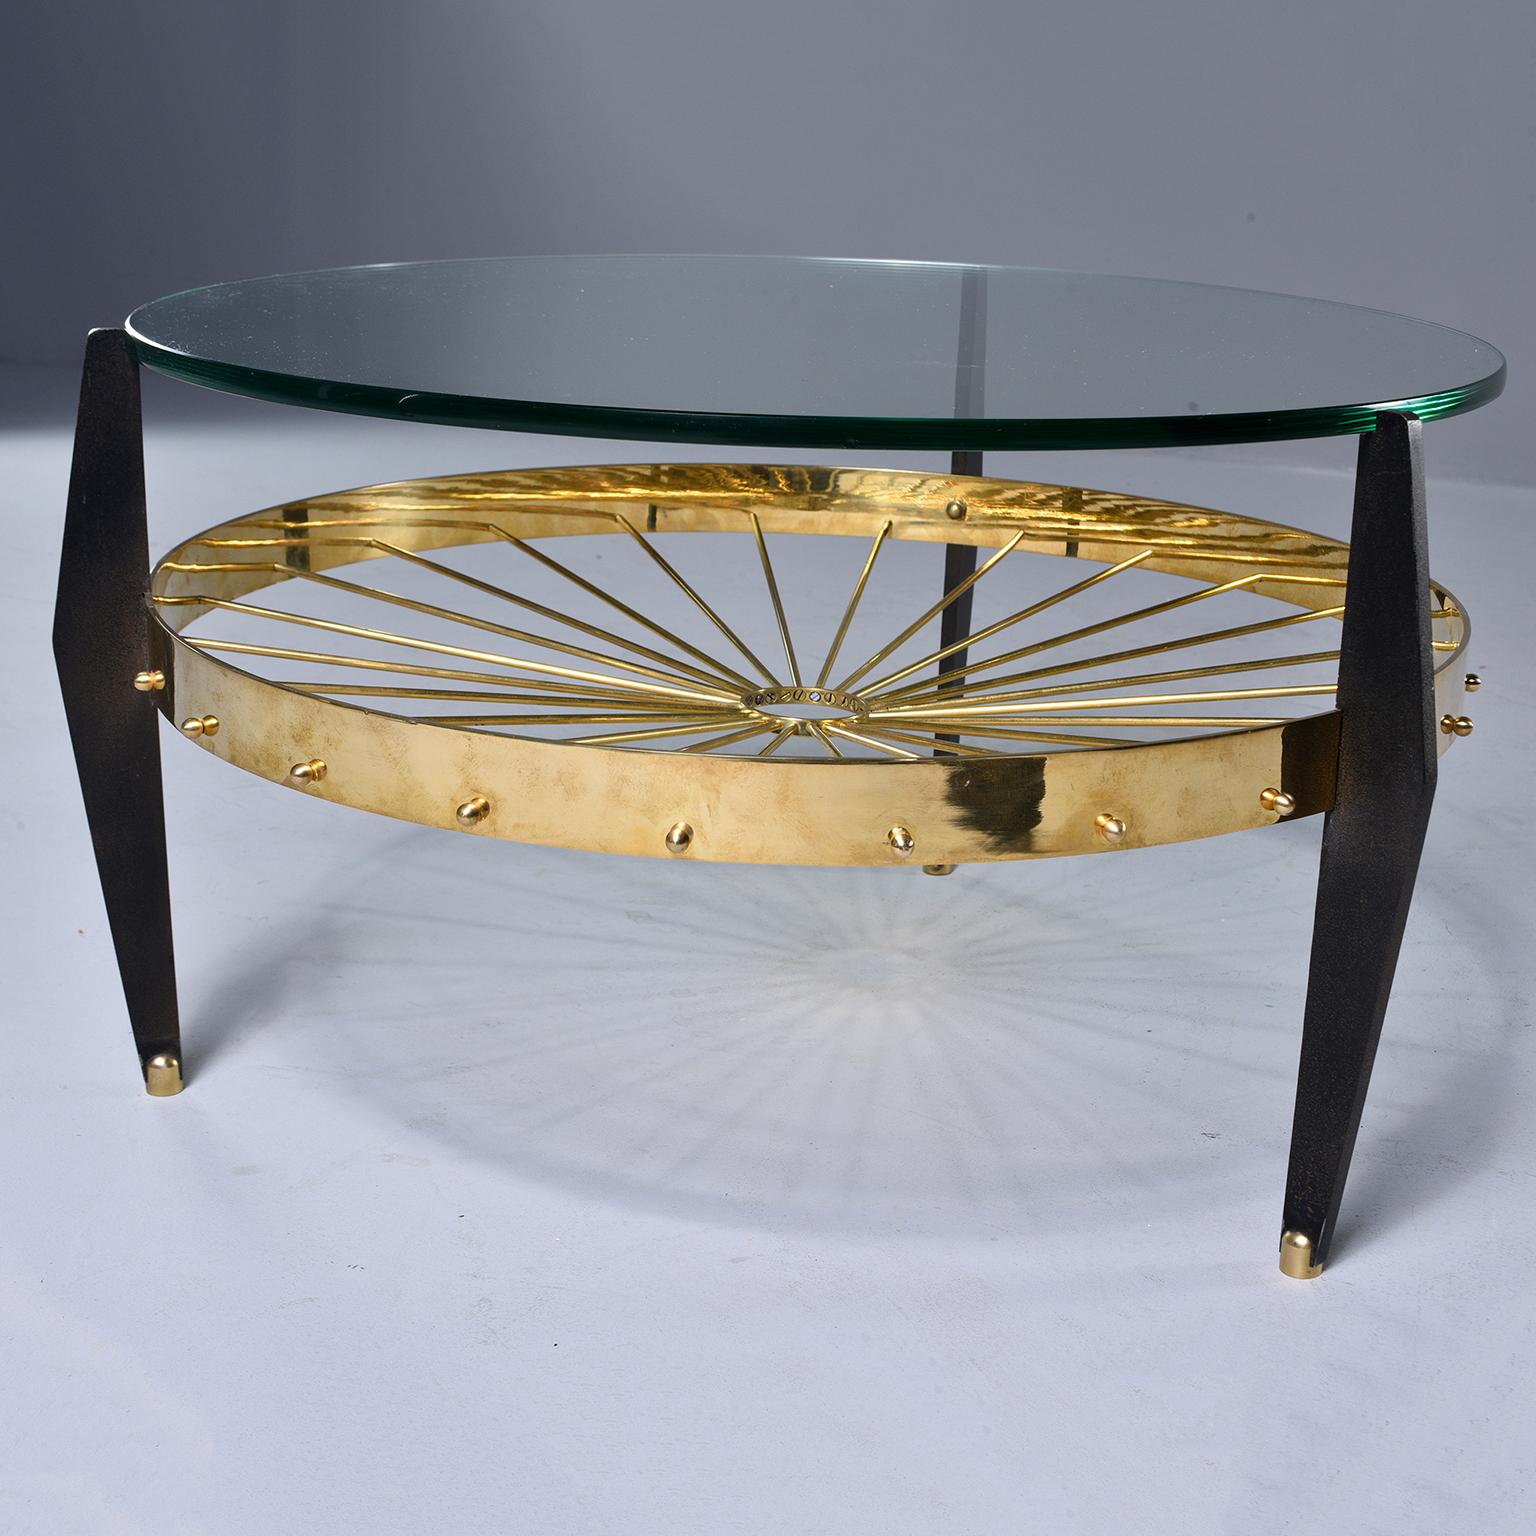 Unusual circa 1970s side table has a brass base with slender spokes and black wood legs with brass capped feet and a heavy glass top.